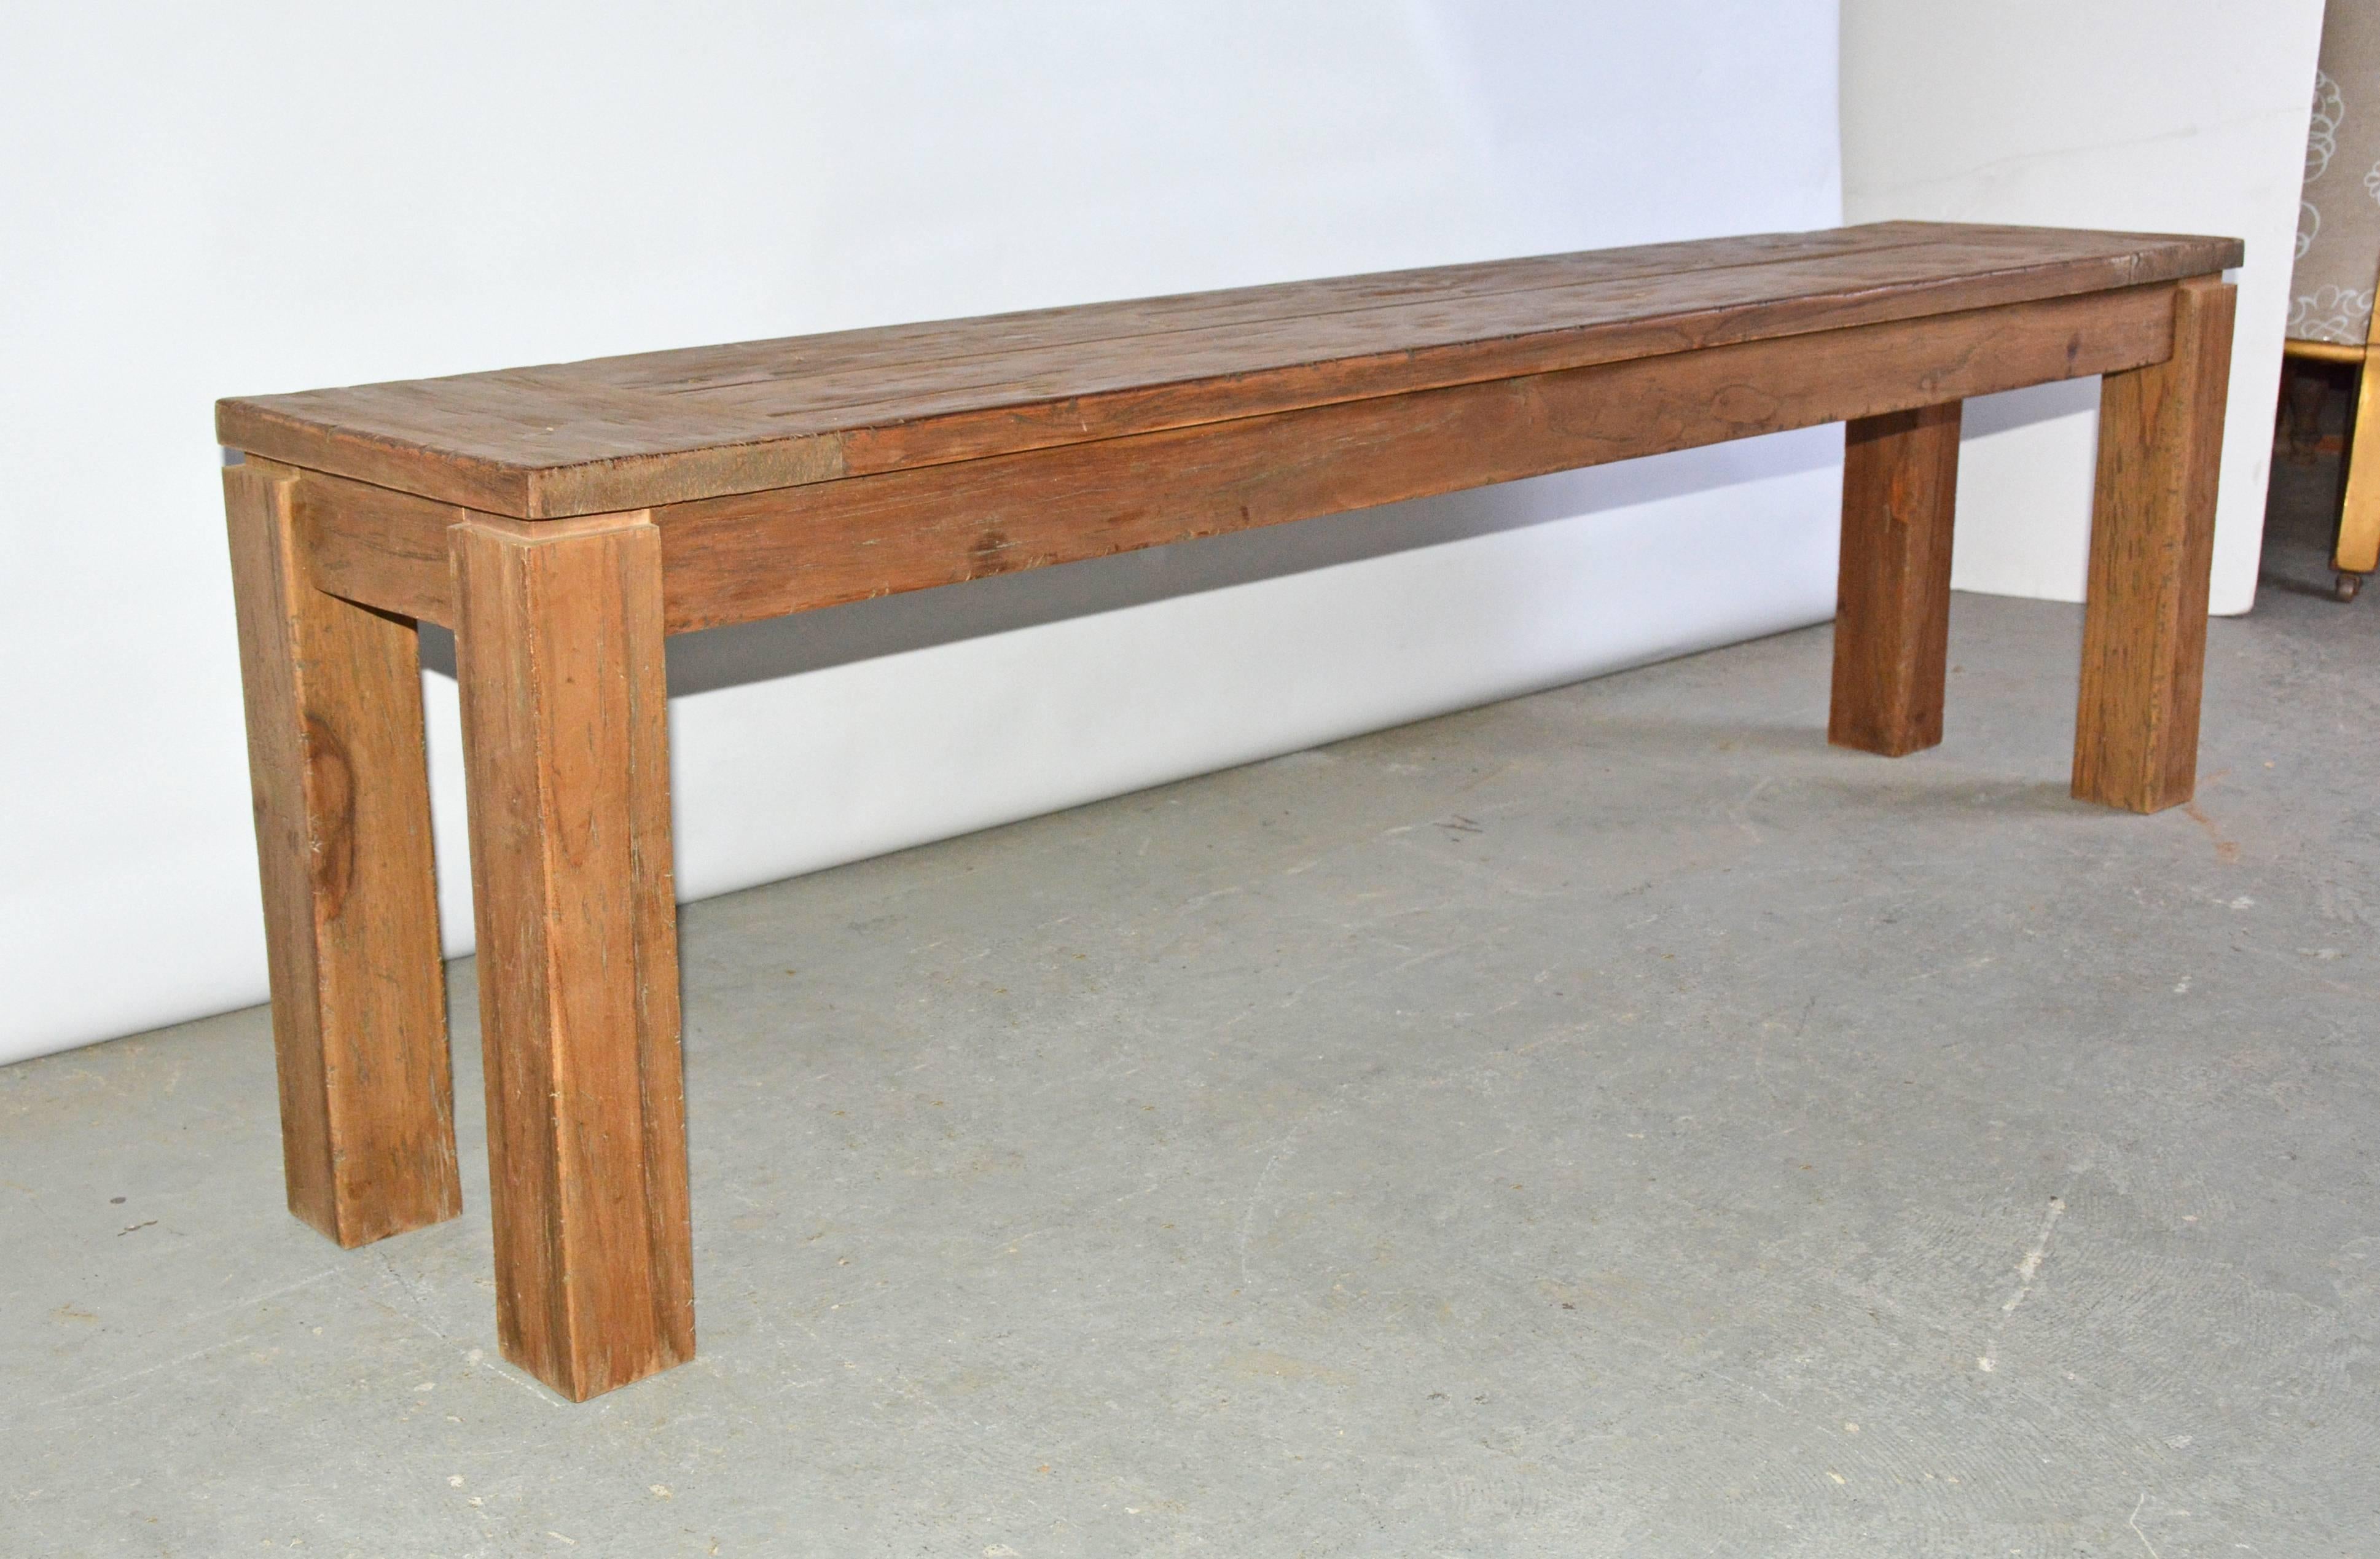 The rustic indoor or outdoor bench has chunky four-square legs and a breadboard top. Great for seating or coffee table. Use on porch, in garden or patio.
Search:  dutch colonial teak wood bench.